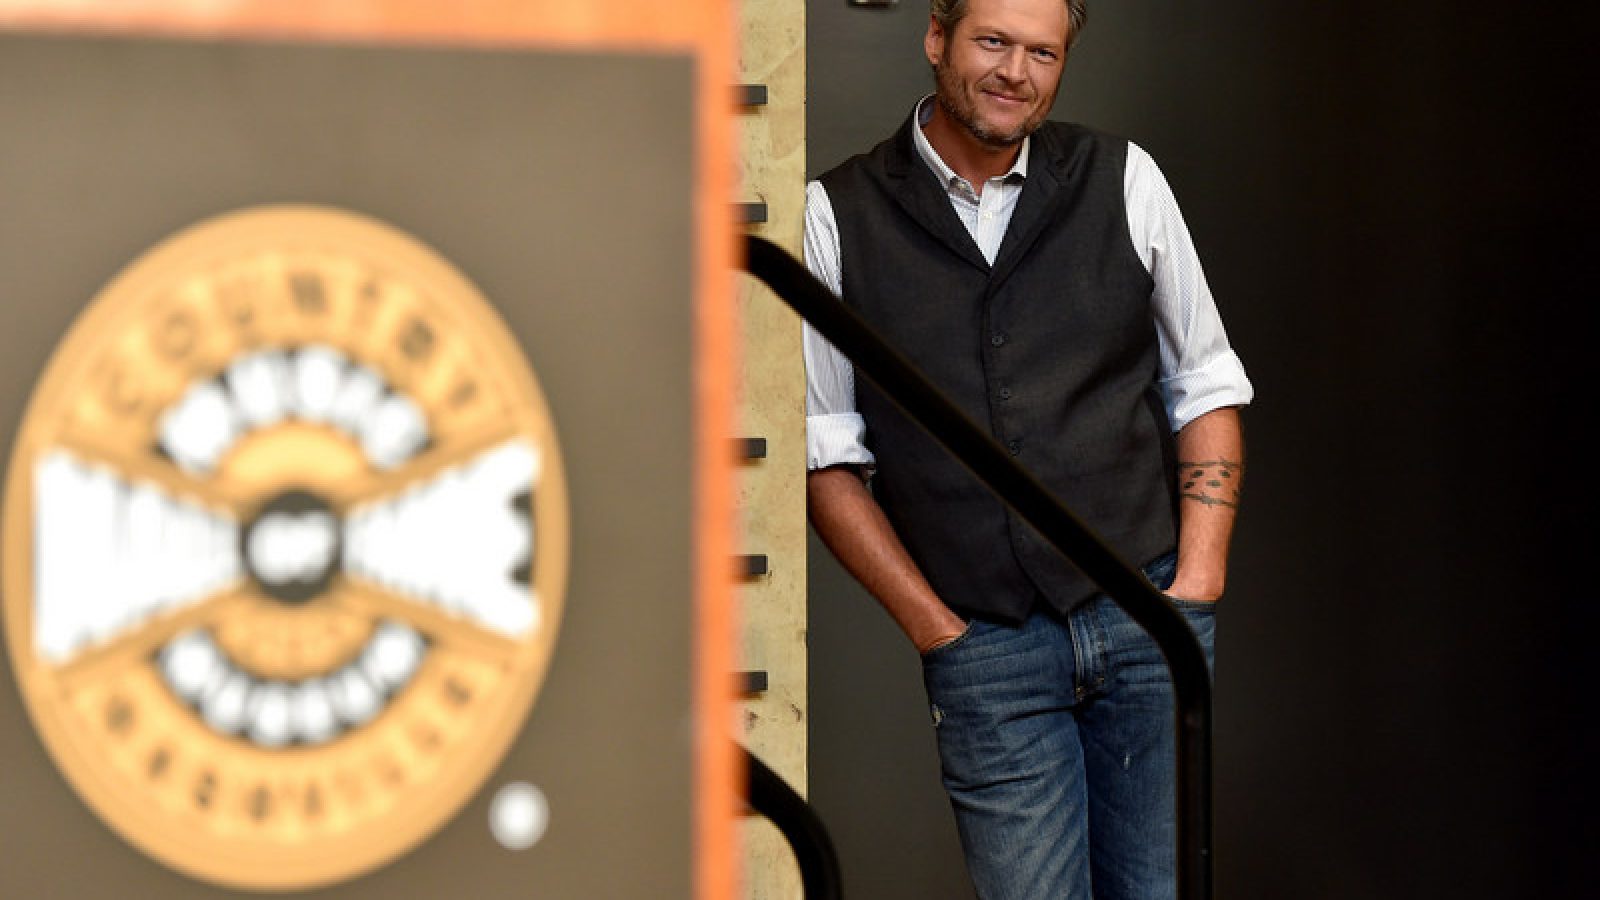 The Country Music Hall of Fame and Museum Debuts "Blake Shelton: Based on a True Story" Exhibit